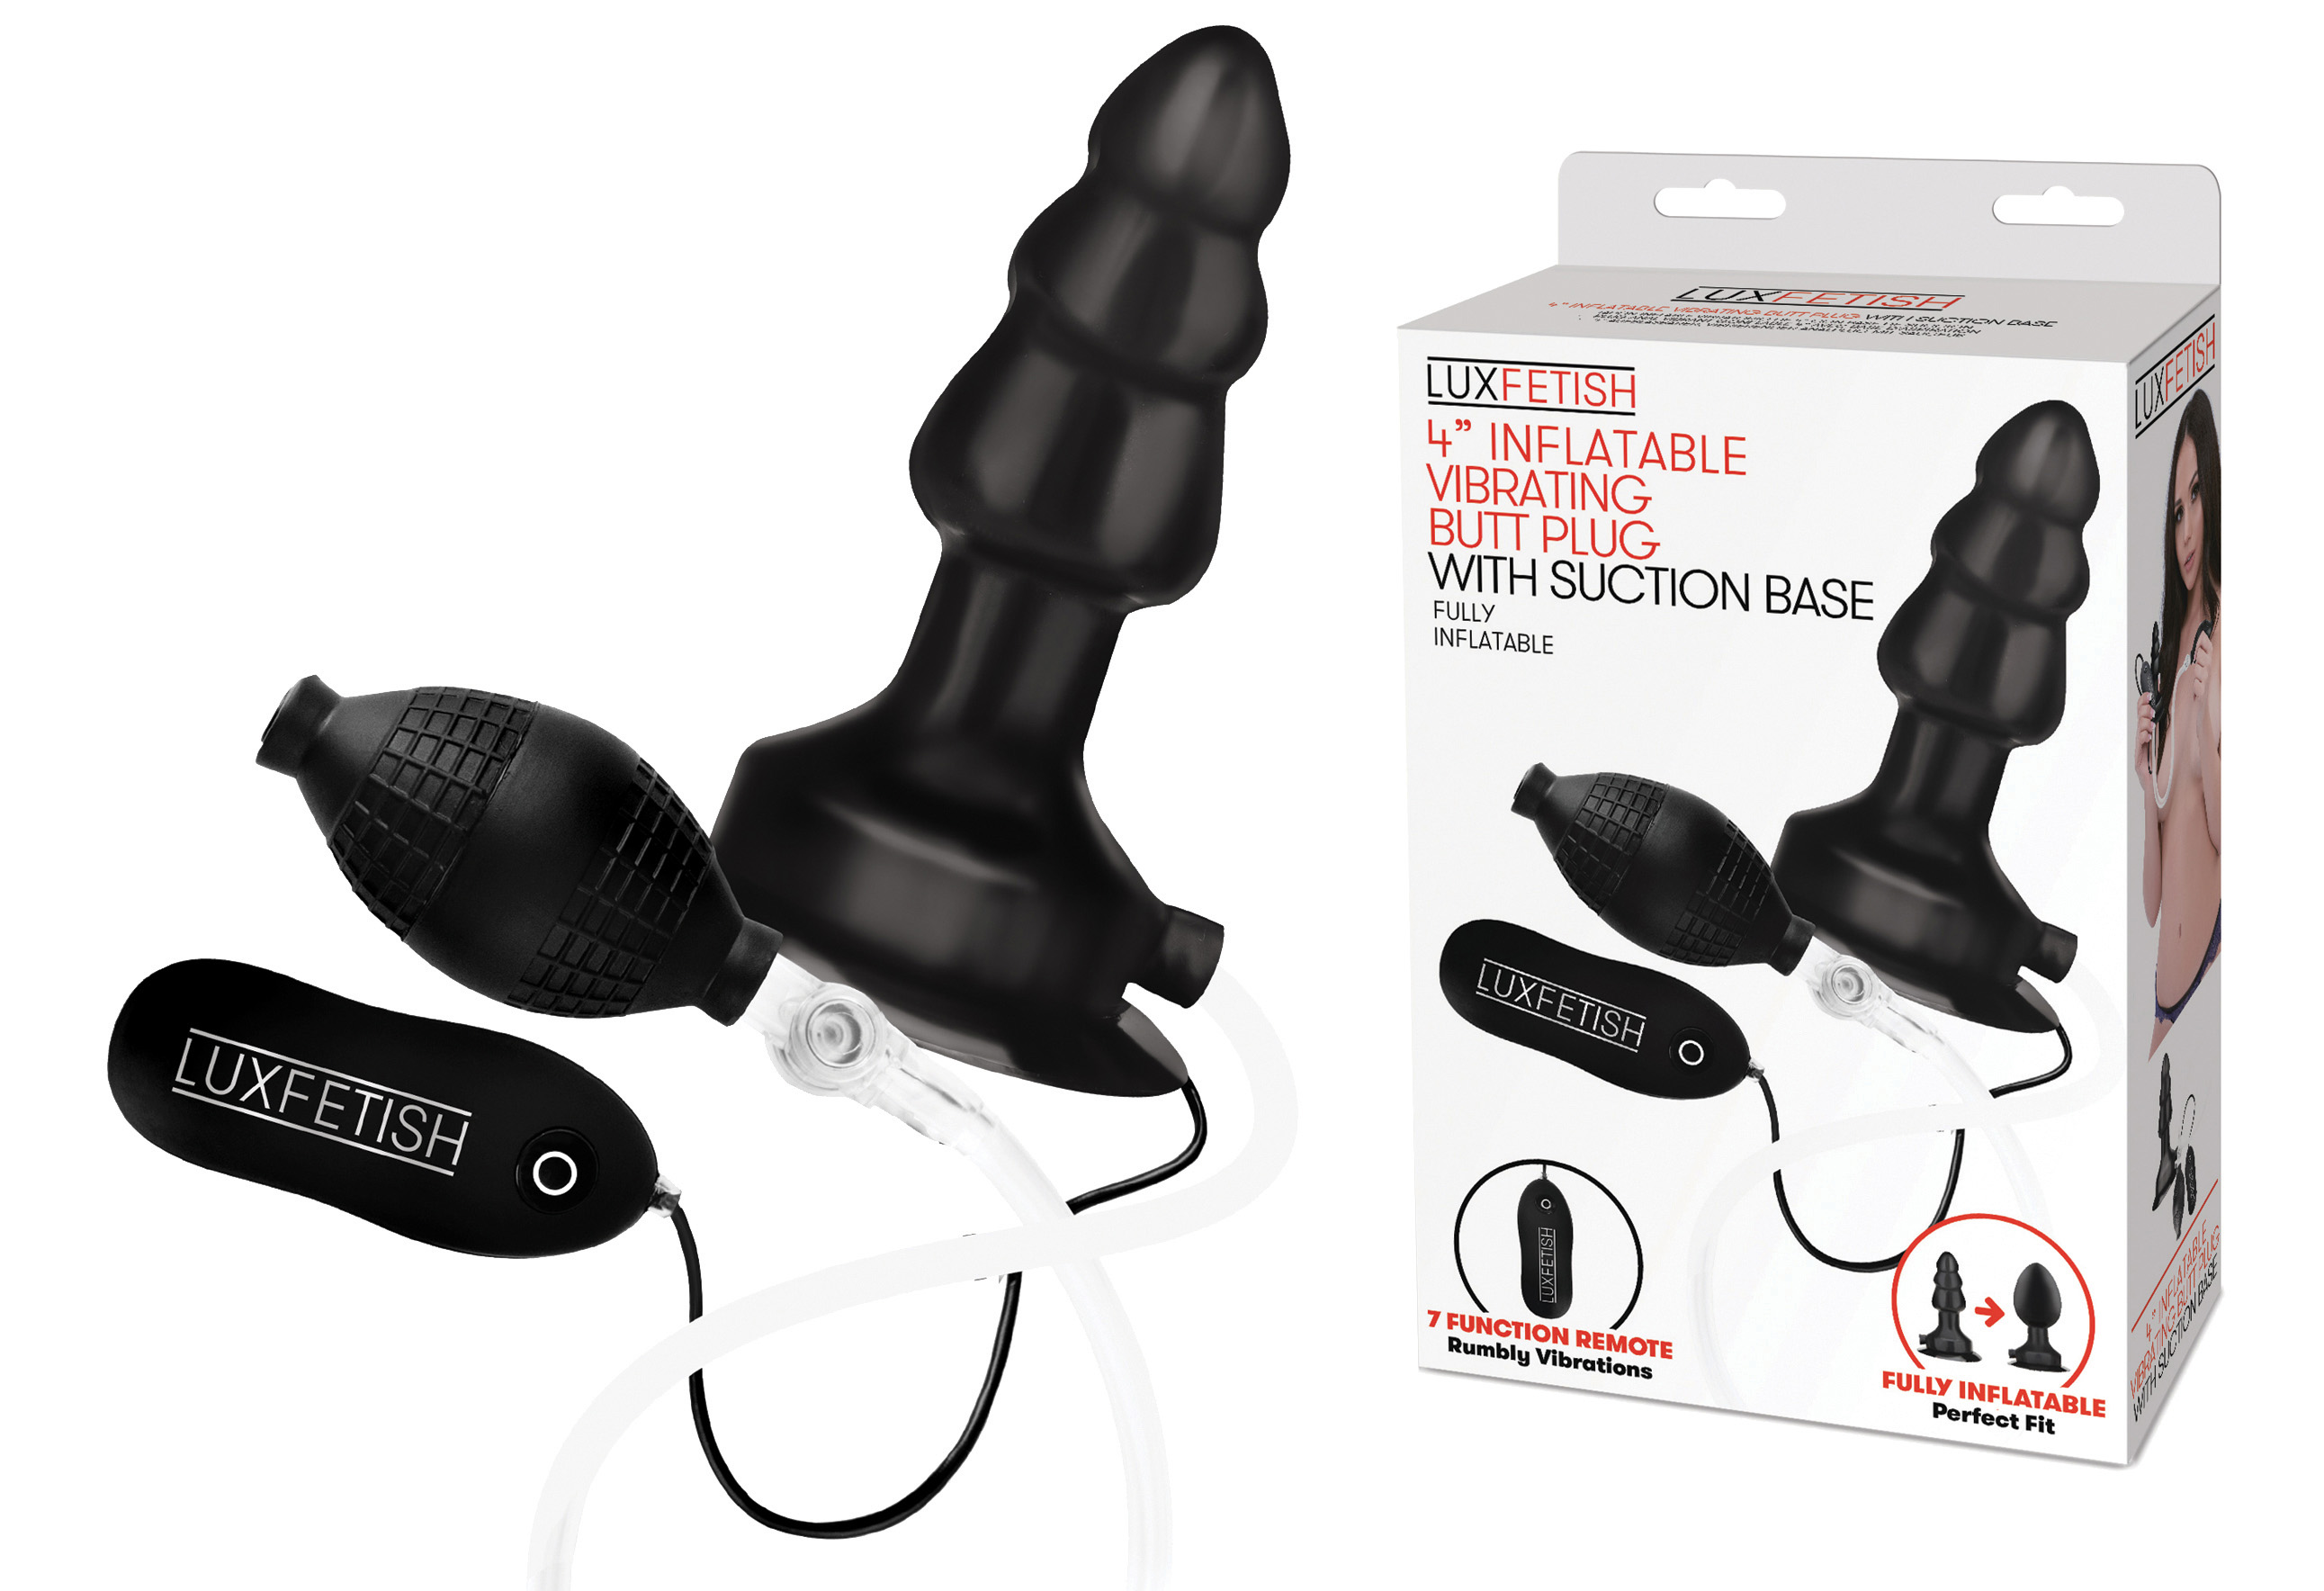 LUX FETISH 4” Inflatable Vibrating Butt Plug with Suction Base